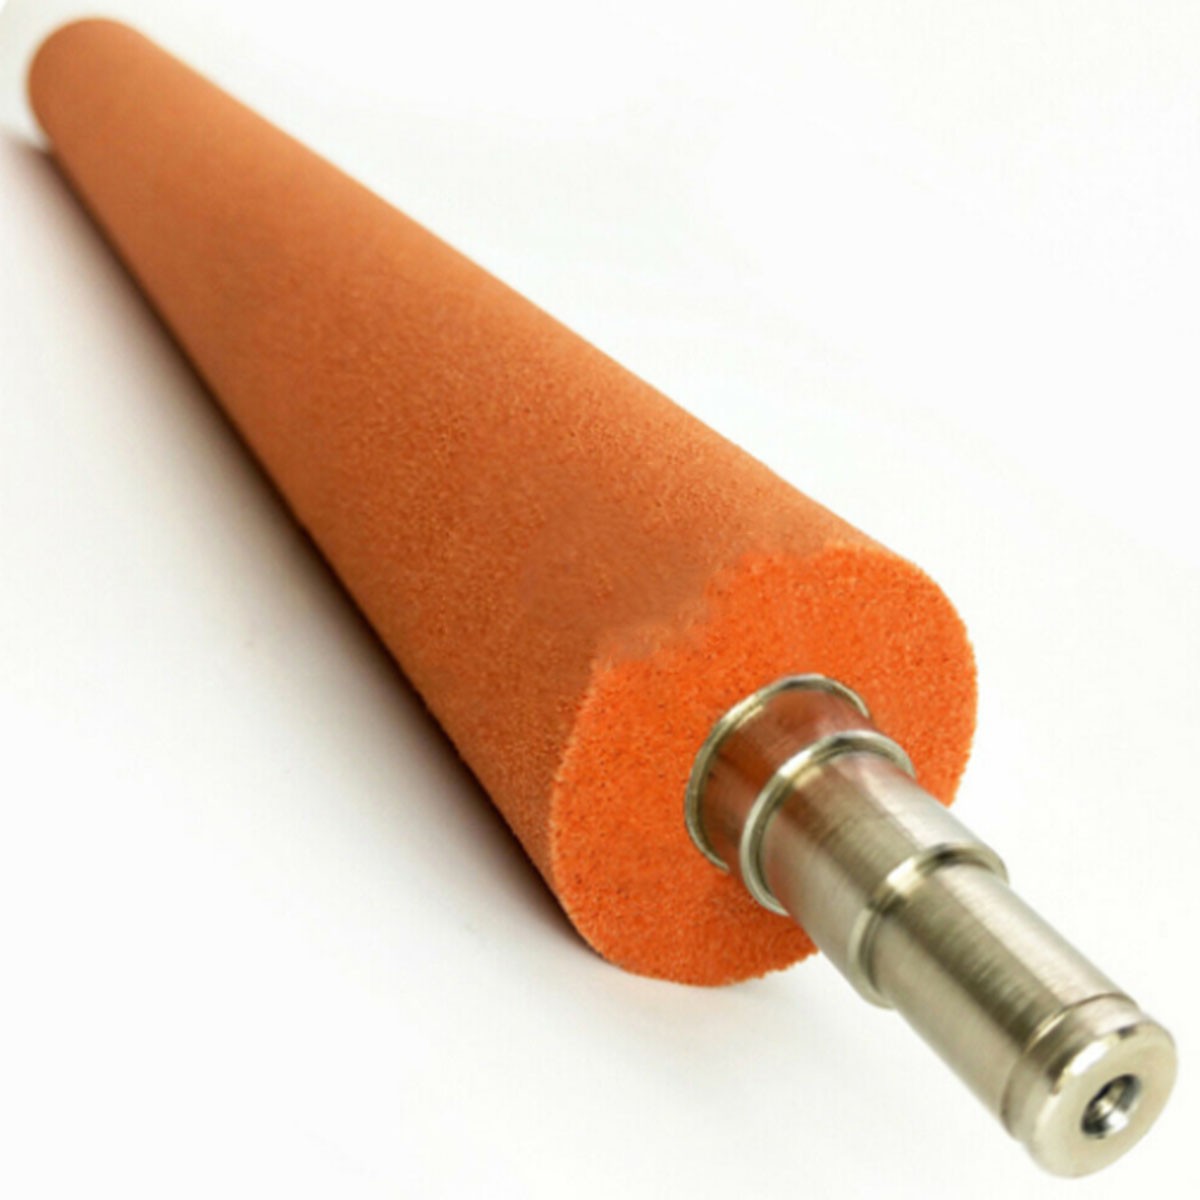 New Fuser Roller For Ricoh MPC C4500 C3500 C811 Red sponge rolle - Click Image to Close